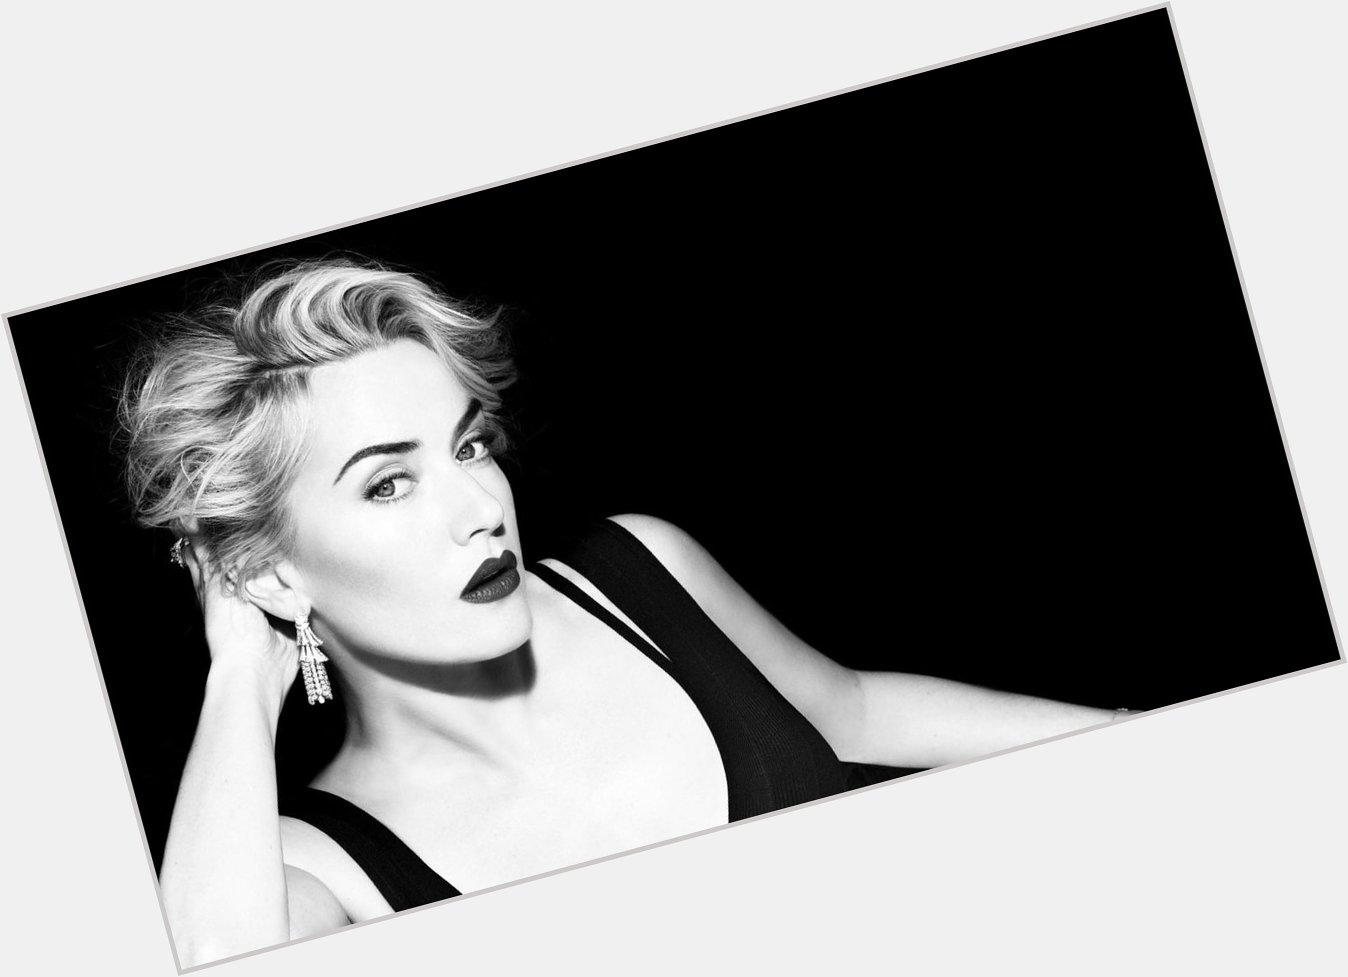 Happy 40th Birthday to the beautiful and talented Kate Winslet! Many happy years and great roles to come! 